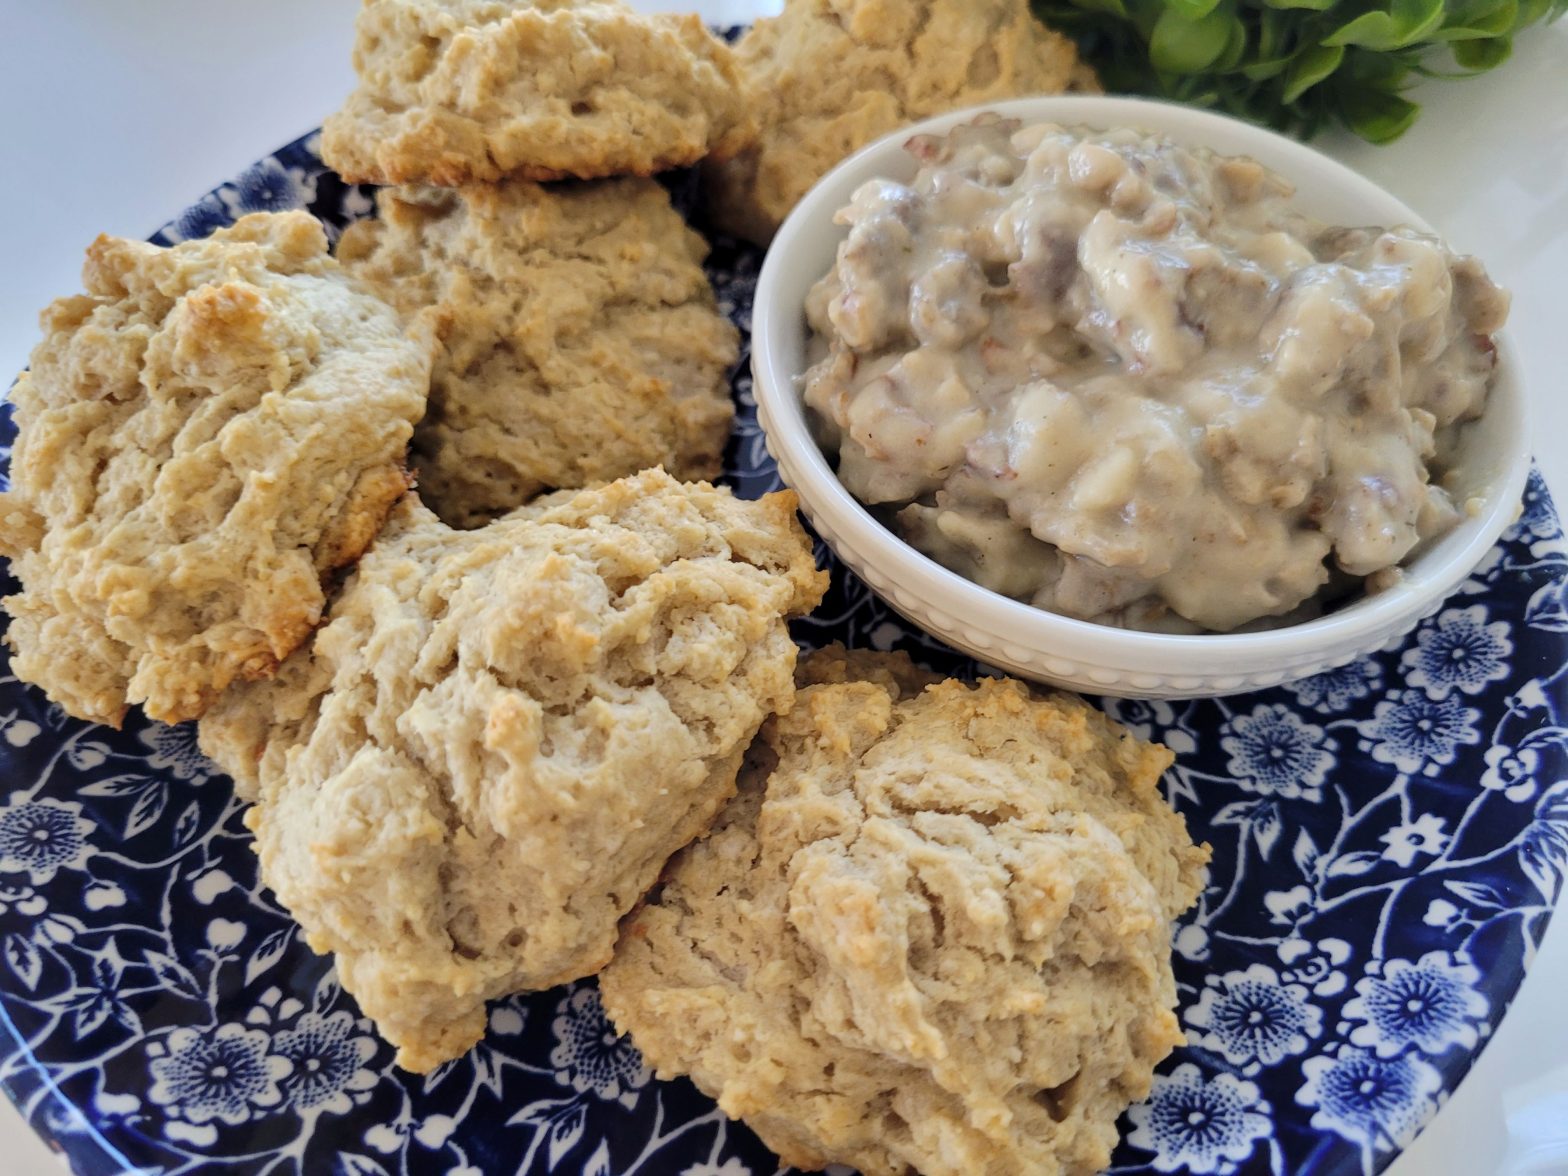 A plate of biscuits and gravy on the side.